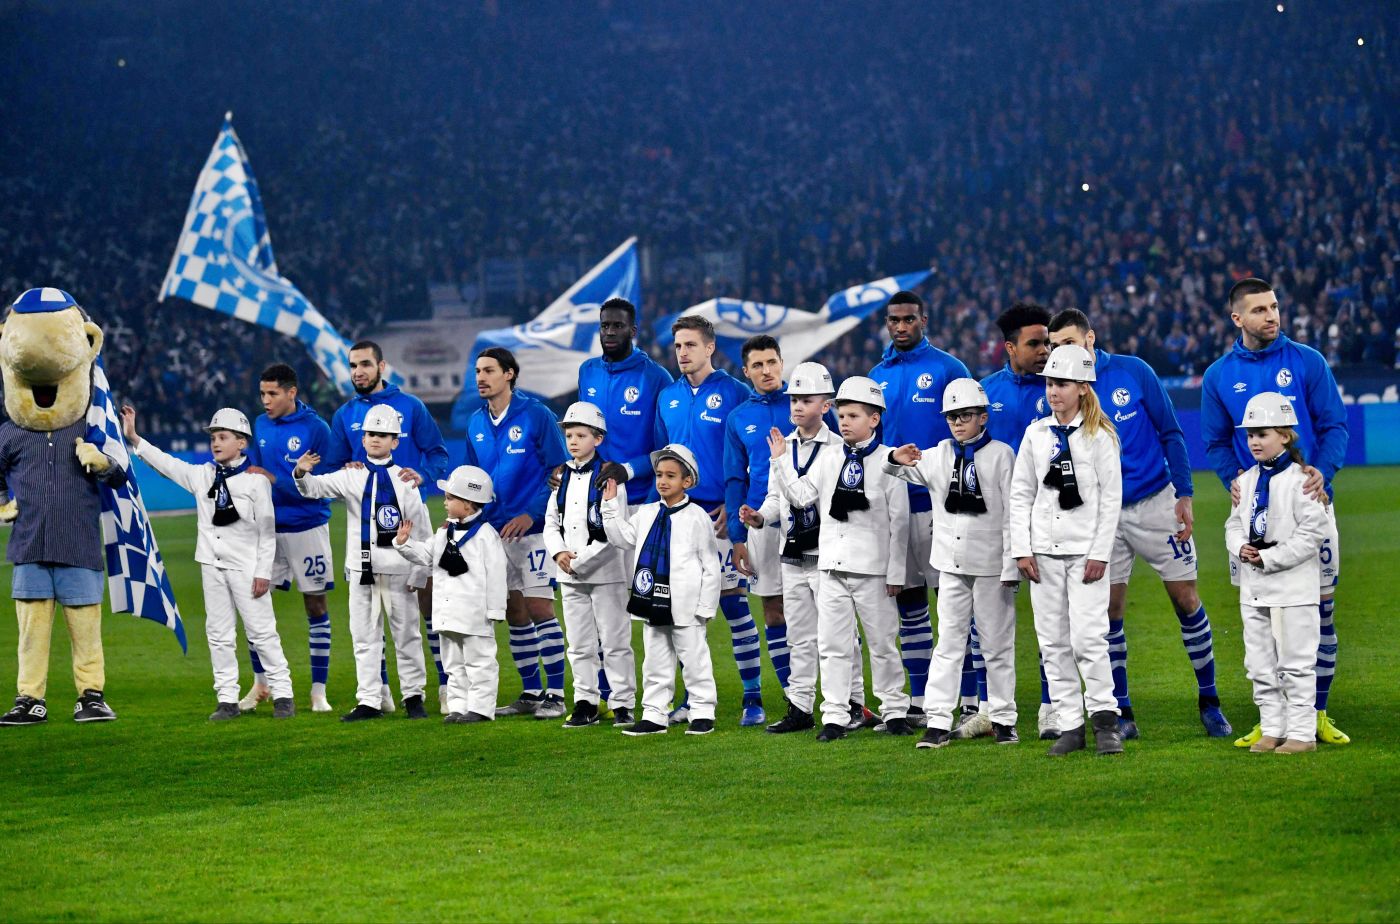 -- Schalke's players stand behind player escorts wering miner's clothes ahead of the German first division football match between FC Schalke 04 and Bayer Leverkusen on December 19, 2018. When Germany's last black coal mine shutters on December 21, 2018, it's not just workers who may shed a tear -- football fans too will mourn the end of the over 150-year-old industry. The industrial Ruhr region -- rich in coal, the blood and soul of industrial Germany since the 19th century -- is also the gritty home turf of some of Germany's best-loved football clubs. - Germany OUT / DFL REGULATIONS PROHIBIT ANY USE OF PHOTOGRAPHS AS IMAGE SEQUENCES AND/OR QUASI-VIDEO
 / AFP / dpa / Ina Fassbender / DFL REGULATIONS PROHIBIT ANY USE OF PHOTOGRAPHS AS IMAGE SEQUENCES AND/OR QUASI-VIDEO